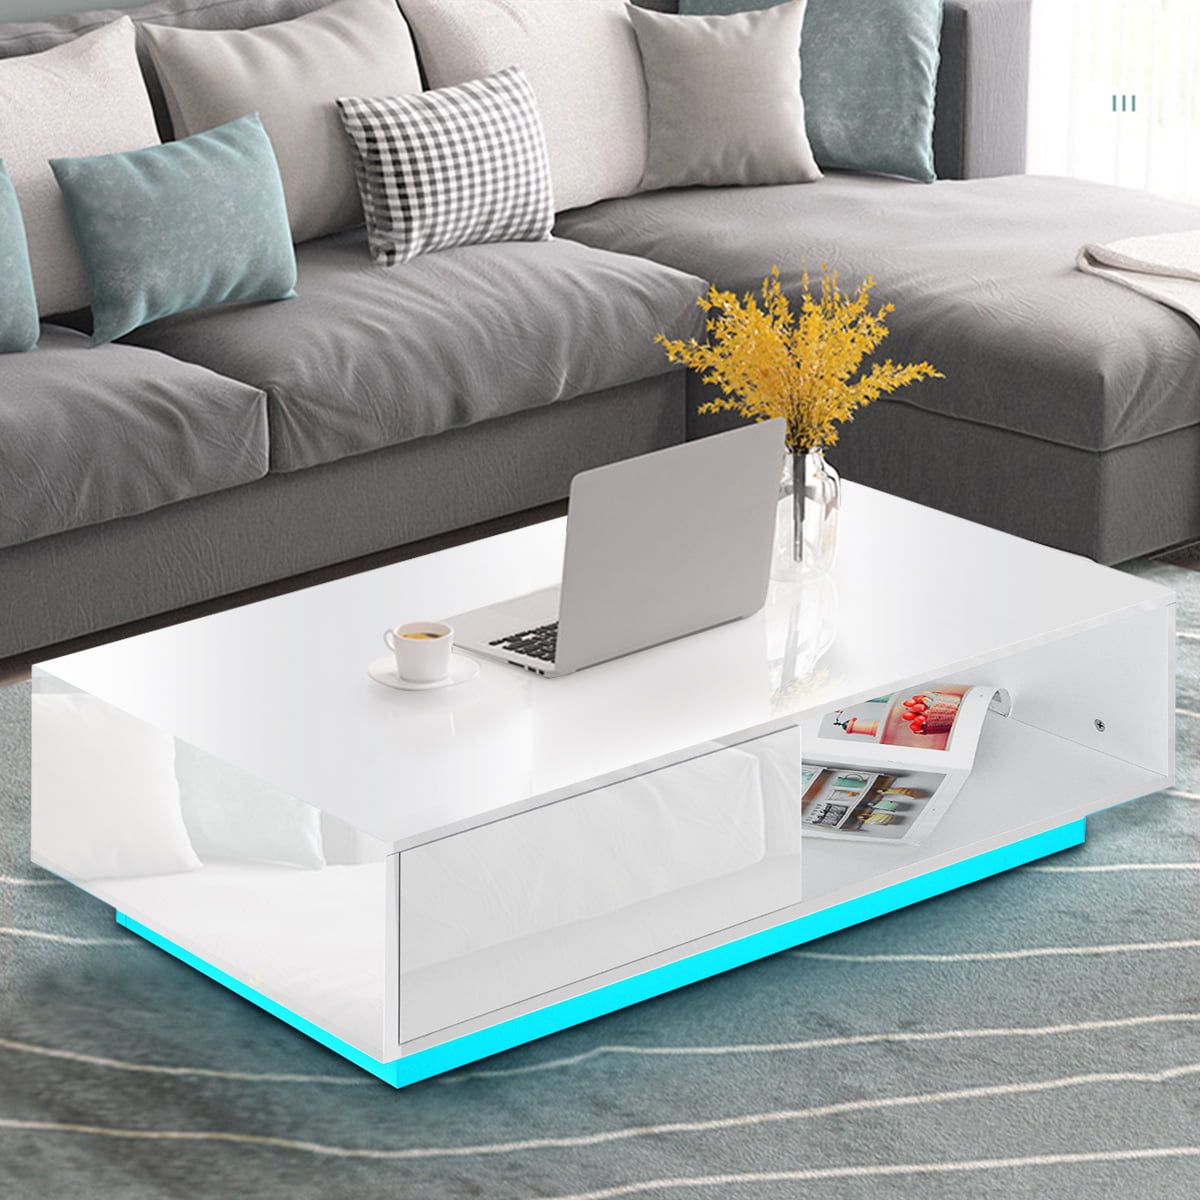 High Gloss Rgb Led Coffee Table With 2 Drawer Storage Modern Sofa Side Throughout Coffee Tables With Drawers And Led Lights (Gallery 2 of 20)